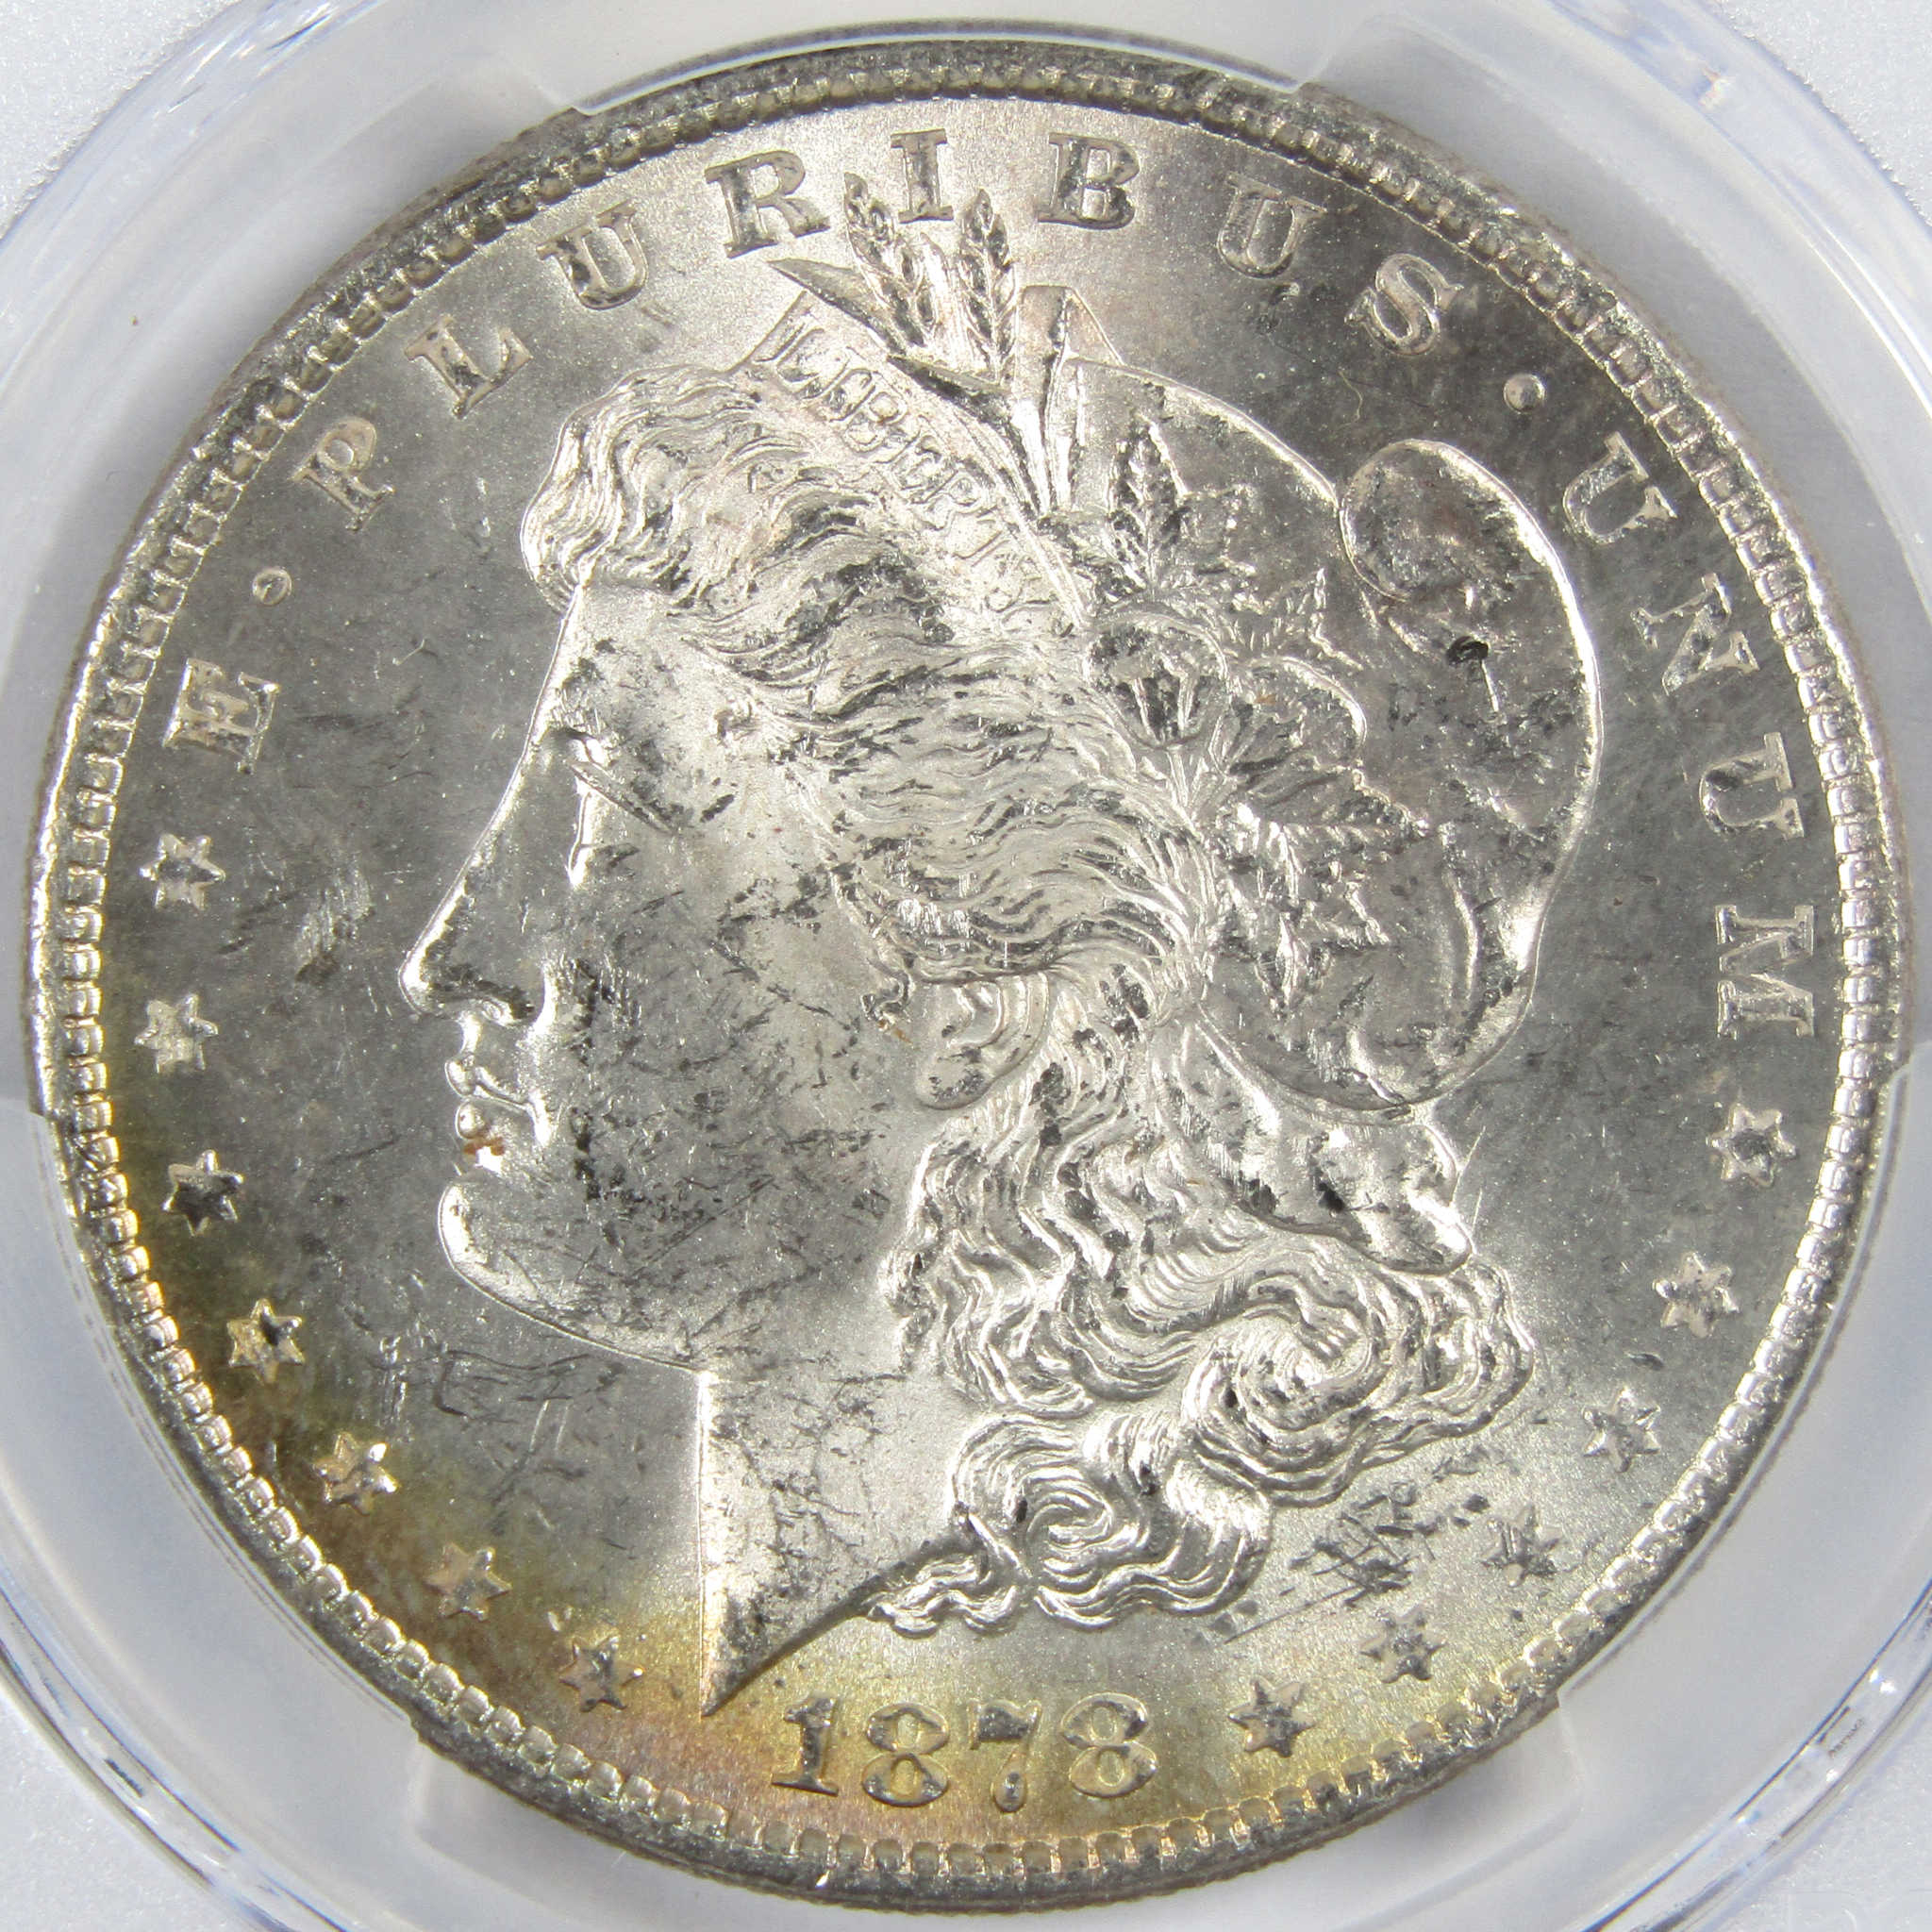 1878 8TF Morgan Dollar MS 63 PCGS 90% Silver $1 Uncirculated SKU:I5904 - Morgan coin - Morgan silver dollar - Morgan silver dollar for sale - Profile Coins &amp; Collectibles